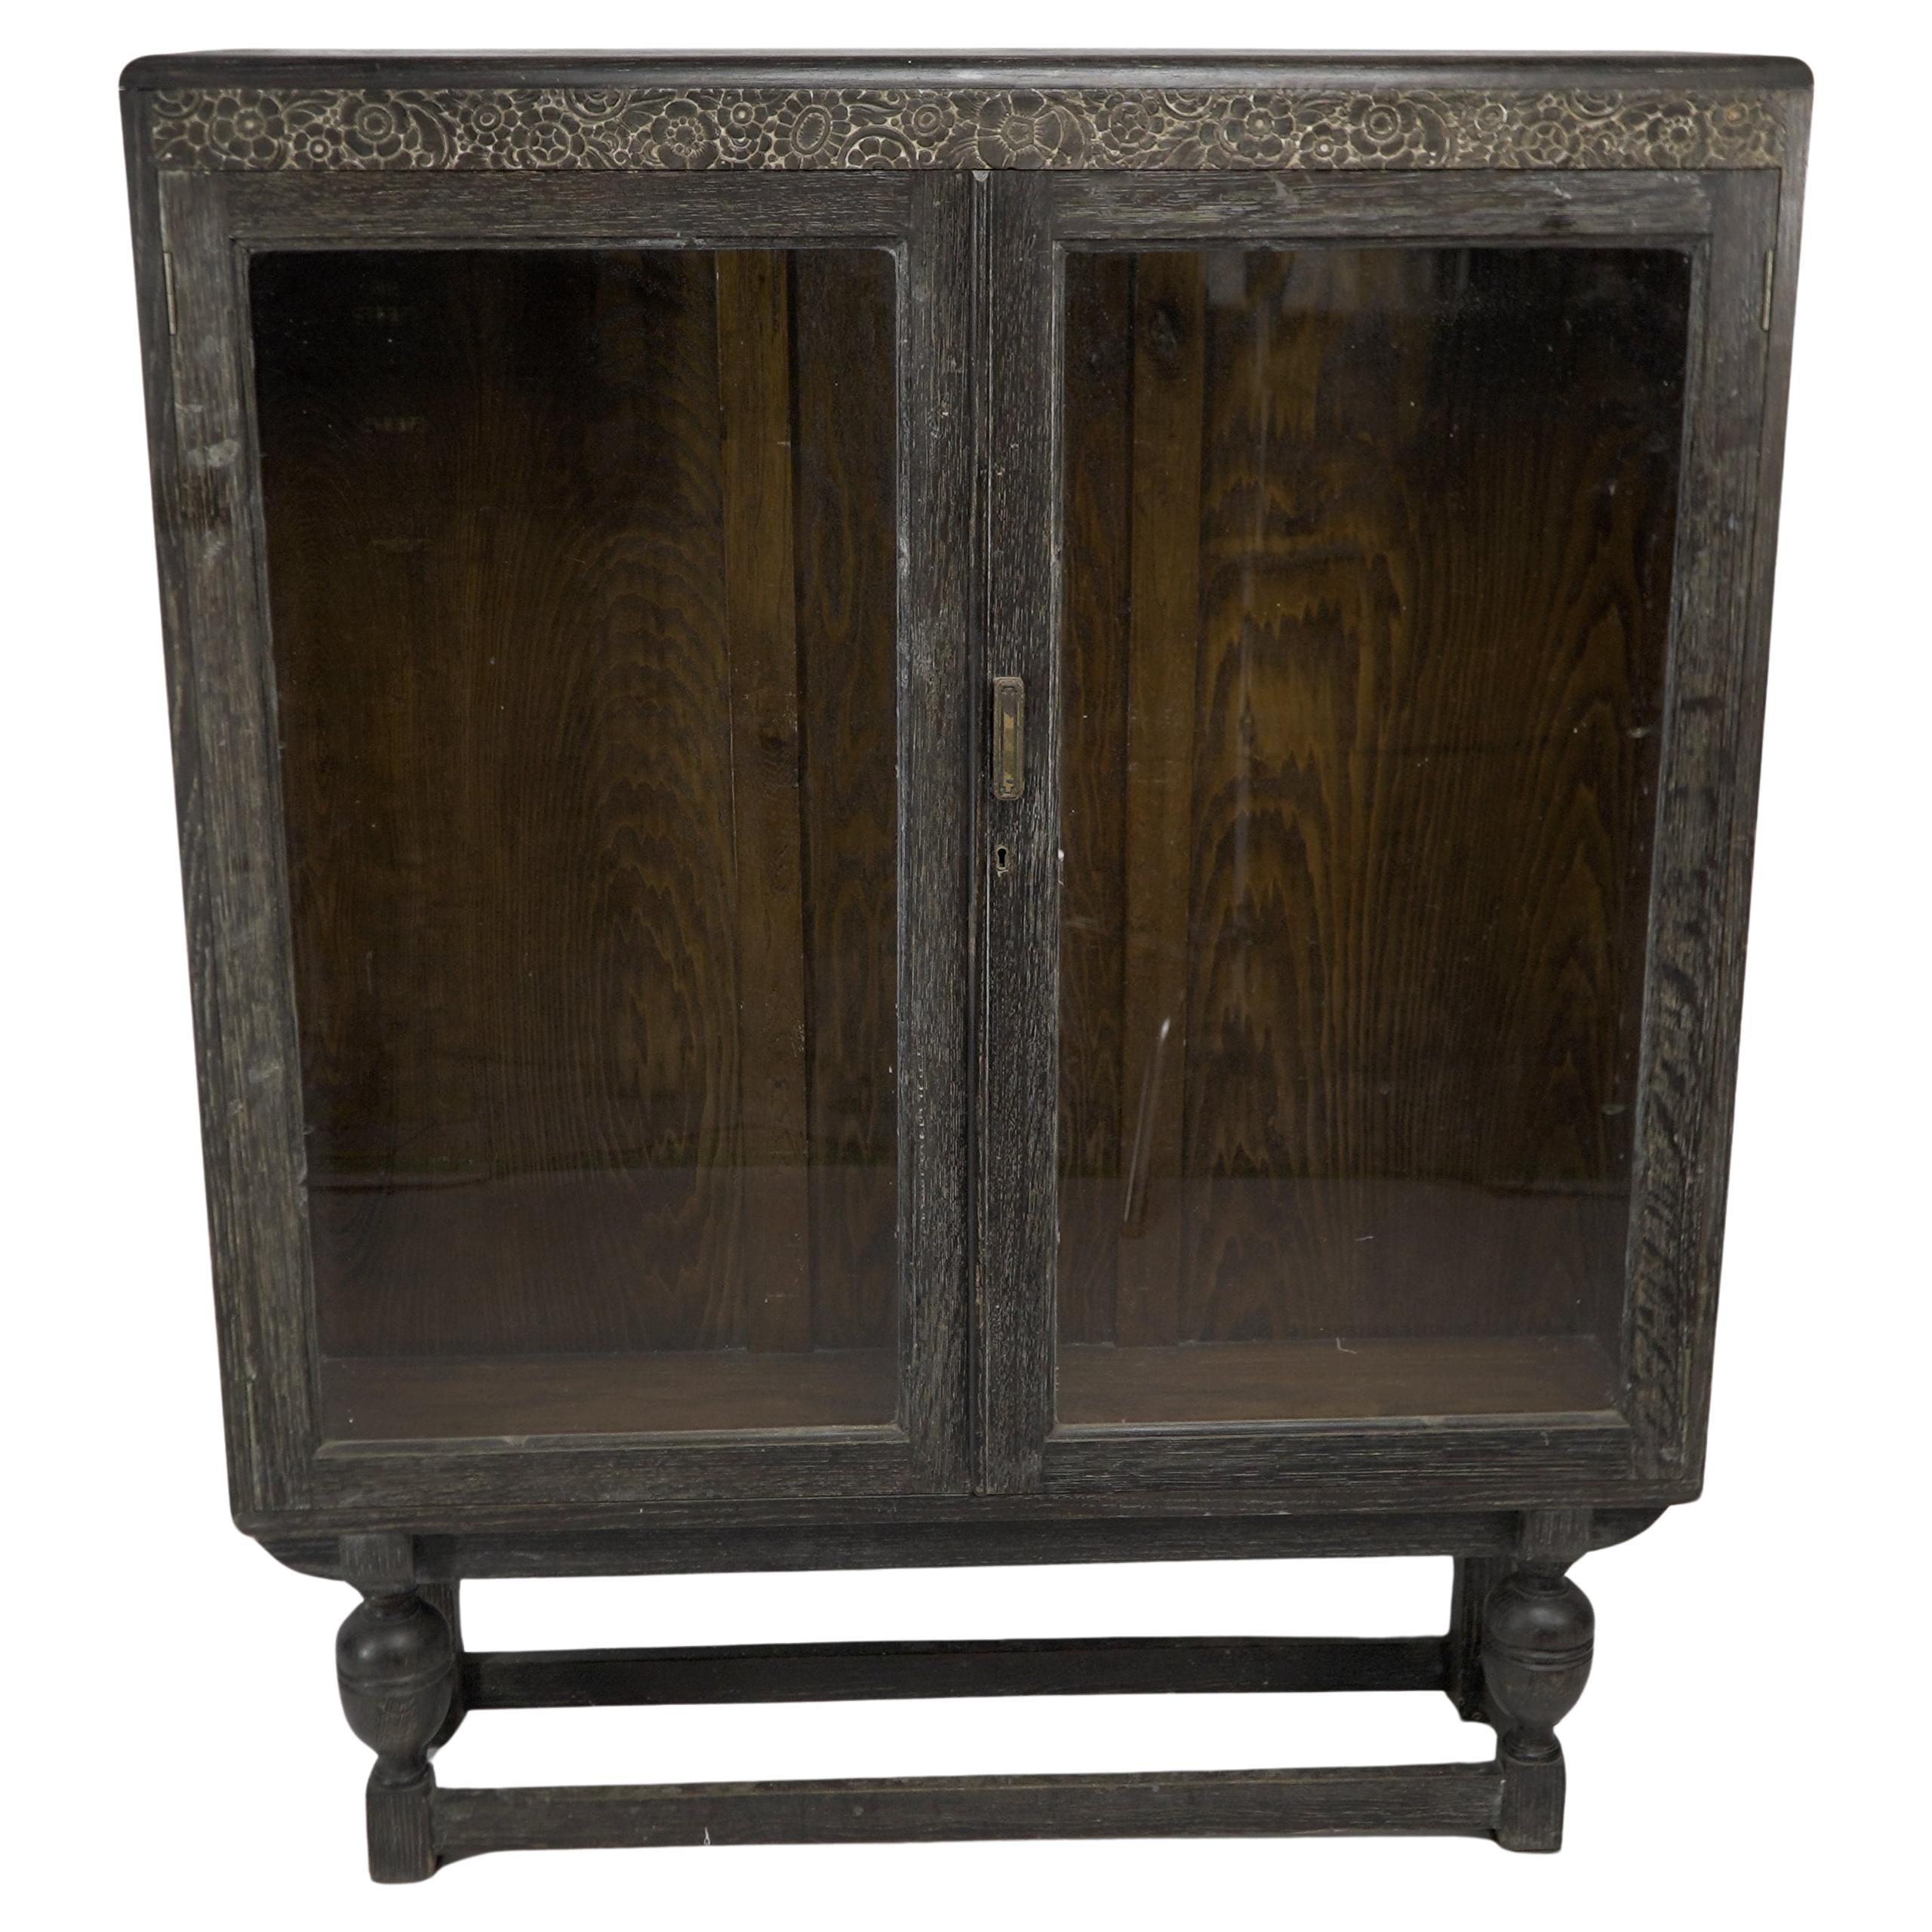 An Art Deco dark and limed oak glazed bookcase with carved floral decoration.